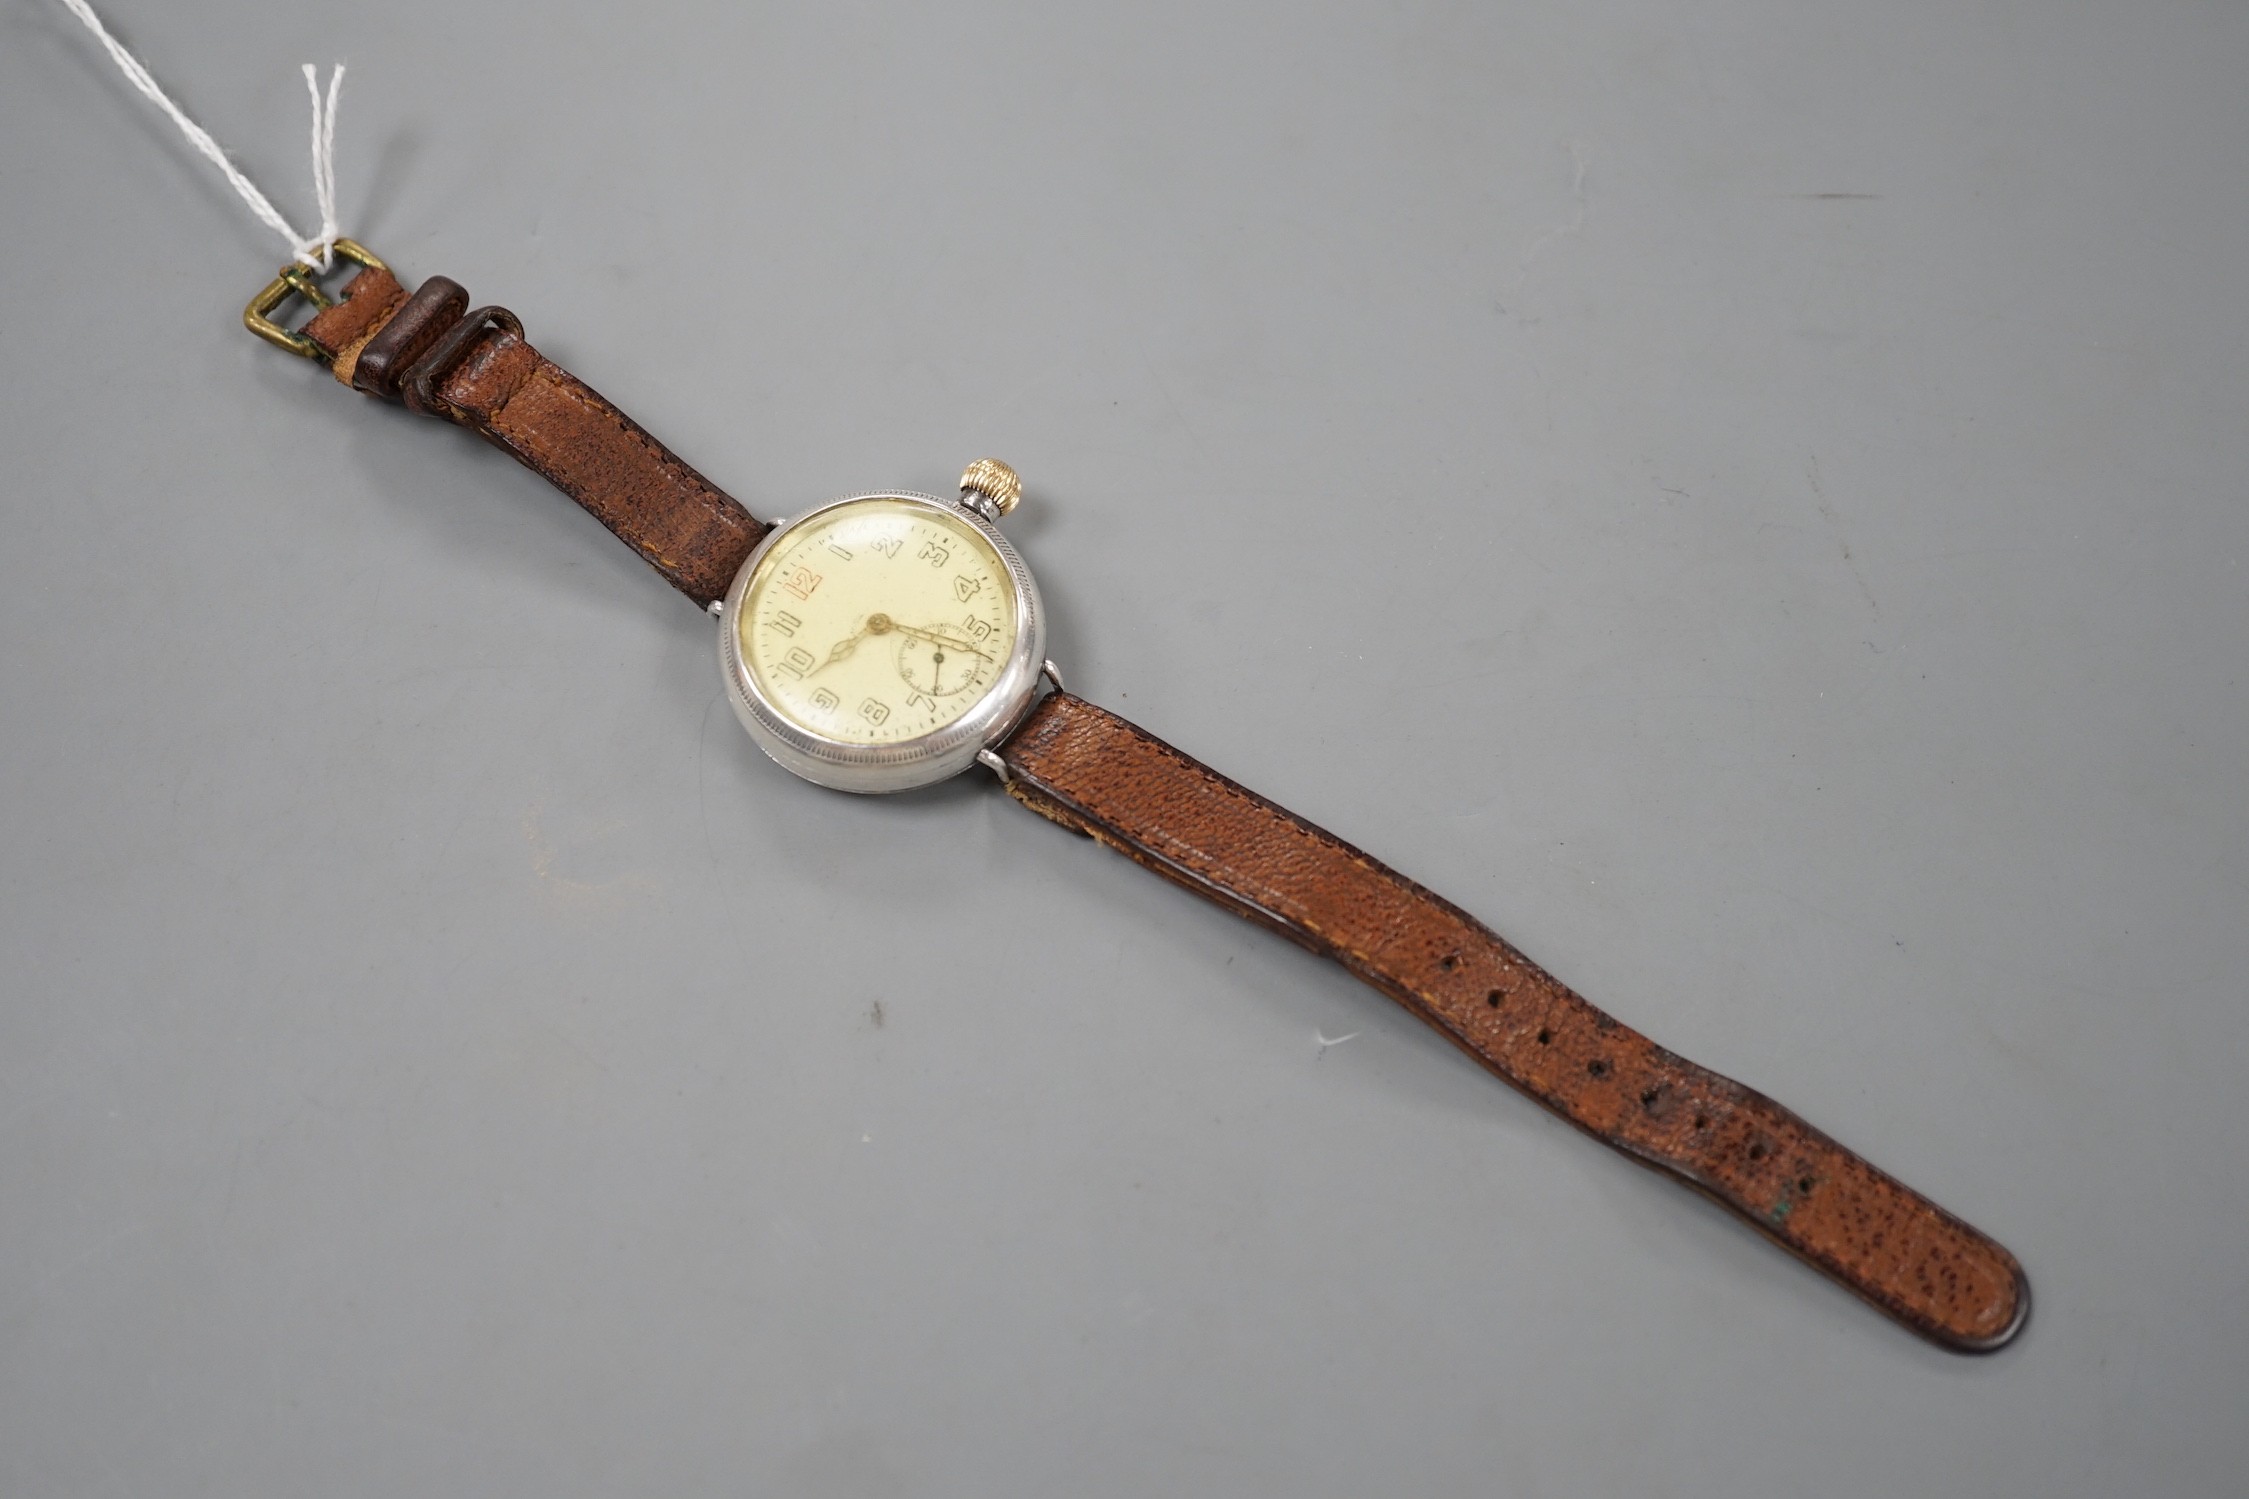 A gentleman's early 20th century silver manual wind wrist watch with Zenith movement, on associated leather strap.